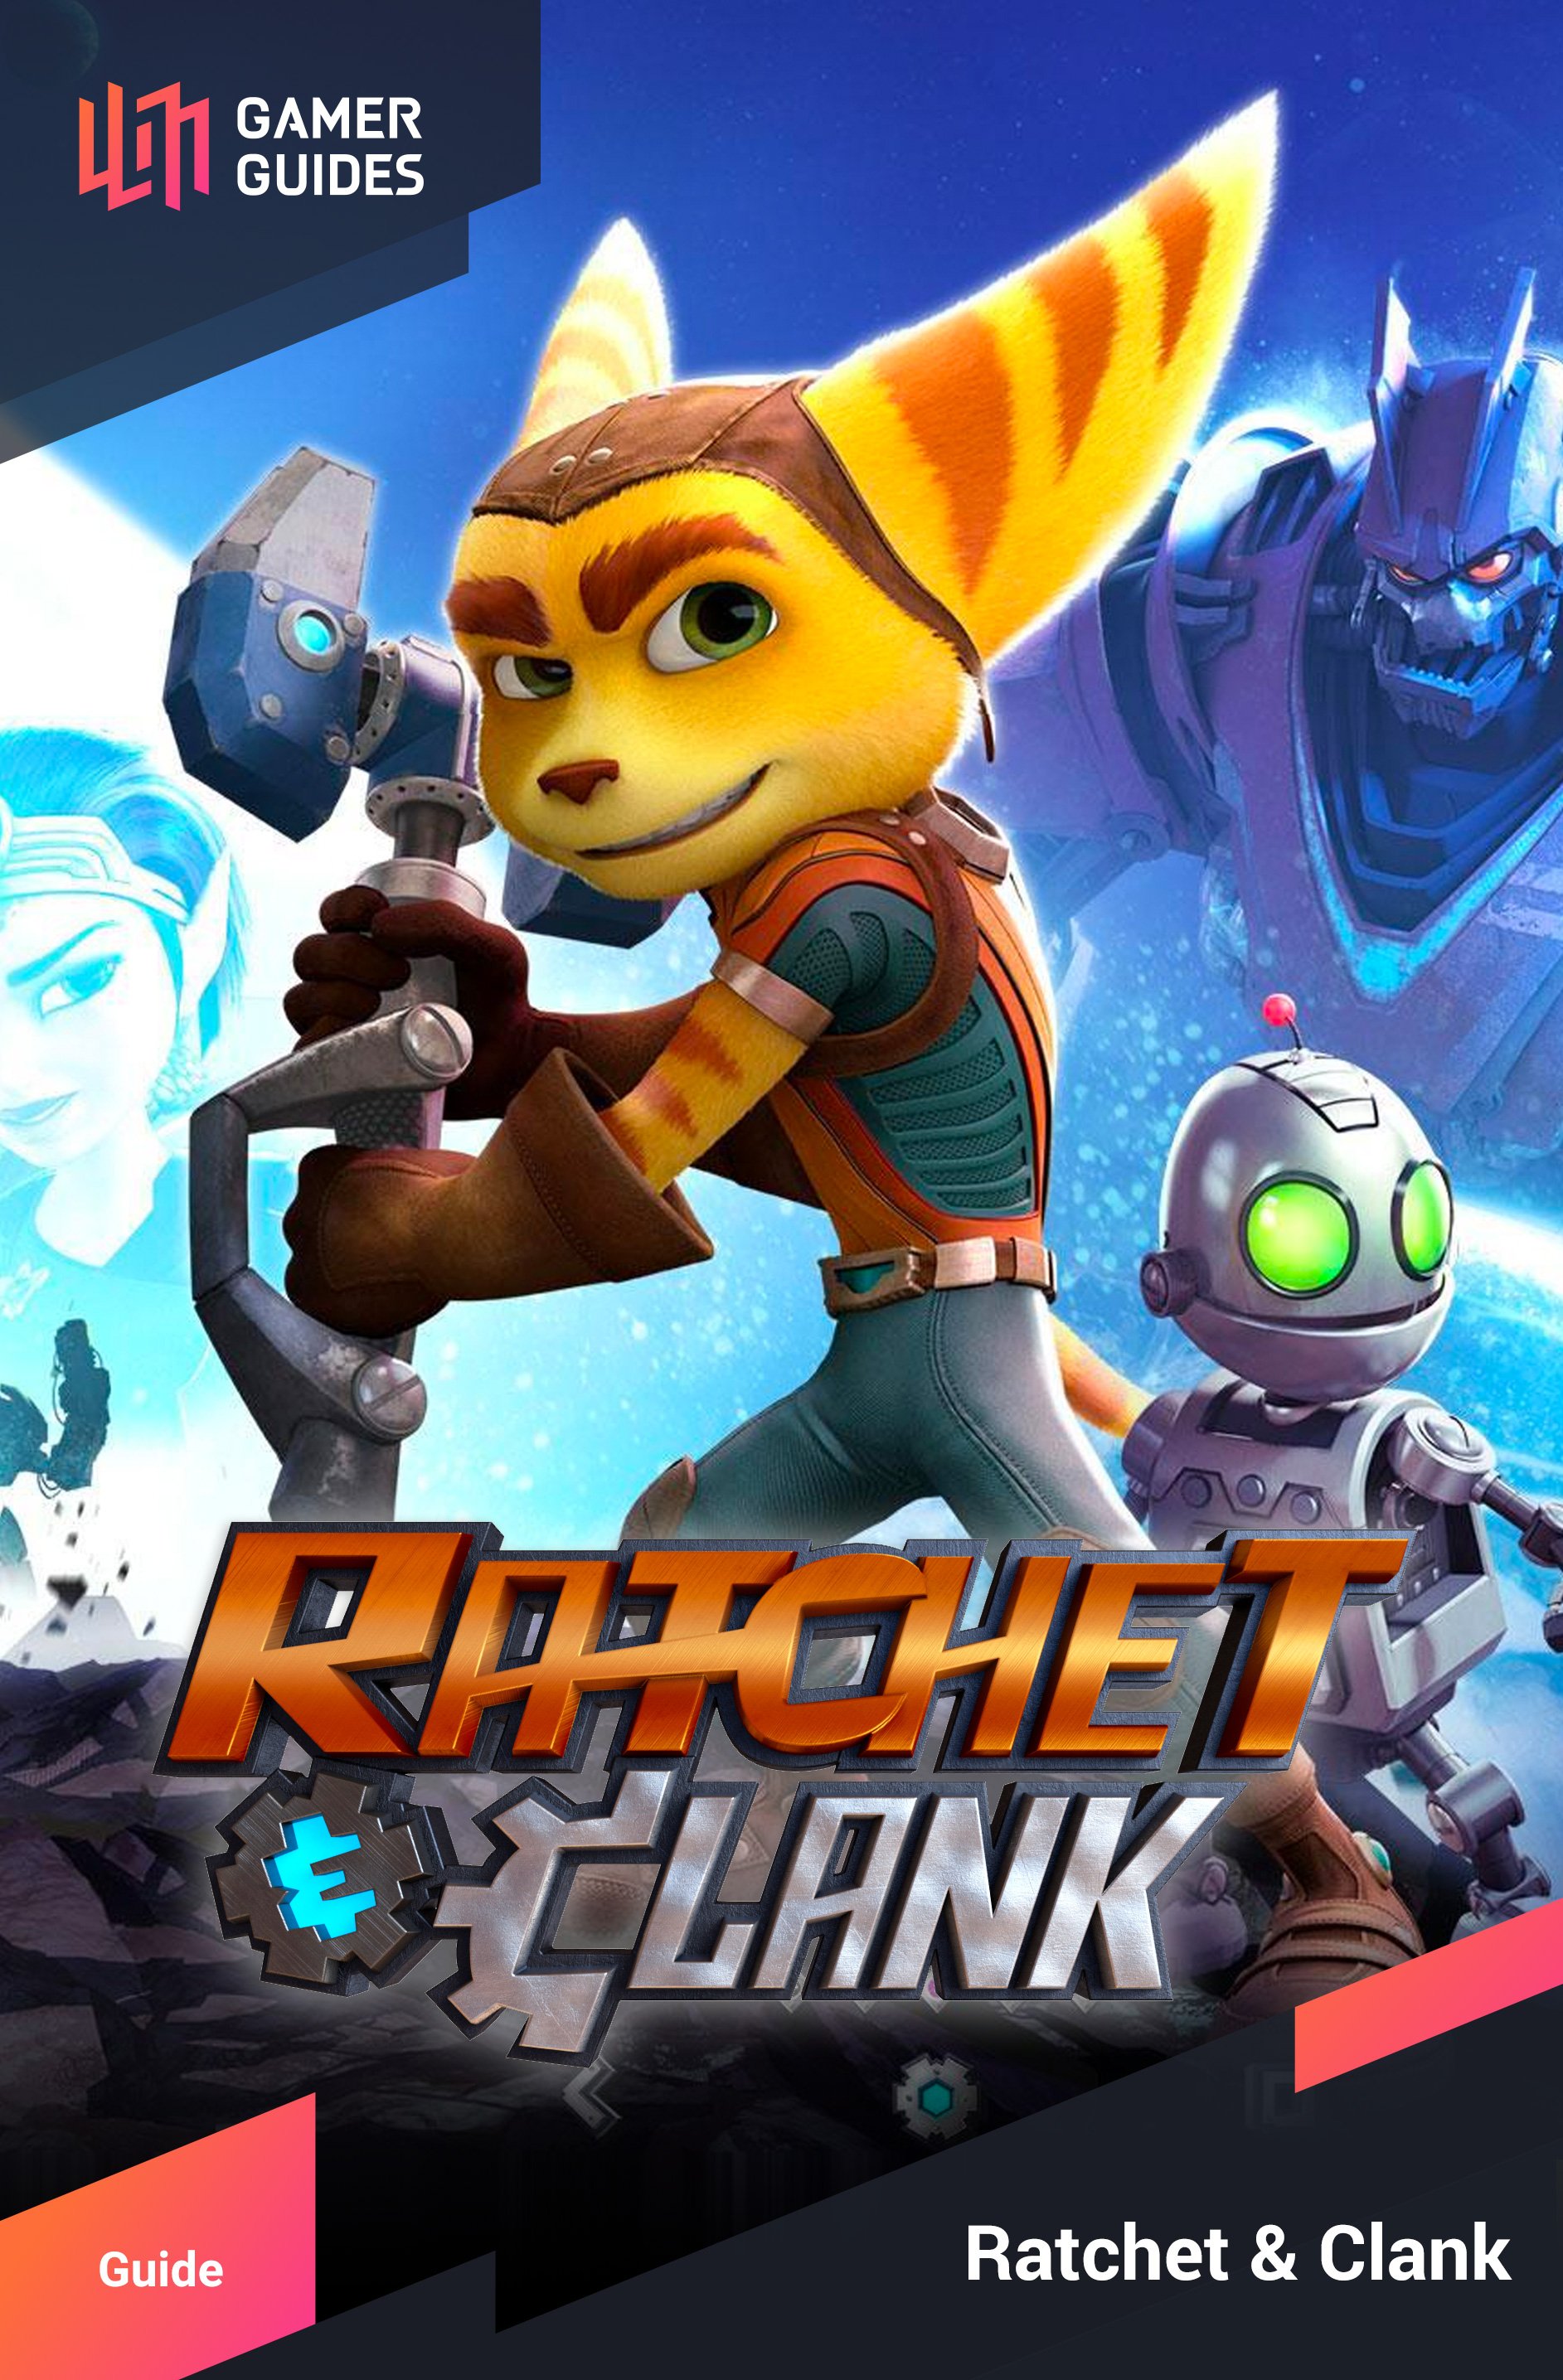 Foreword - Introduction - Introduction | Ratchet & Clank | Gamer Guides®